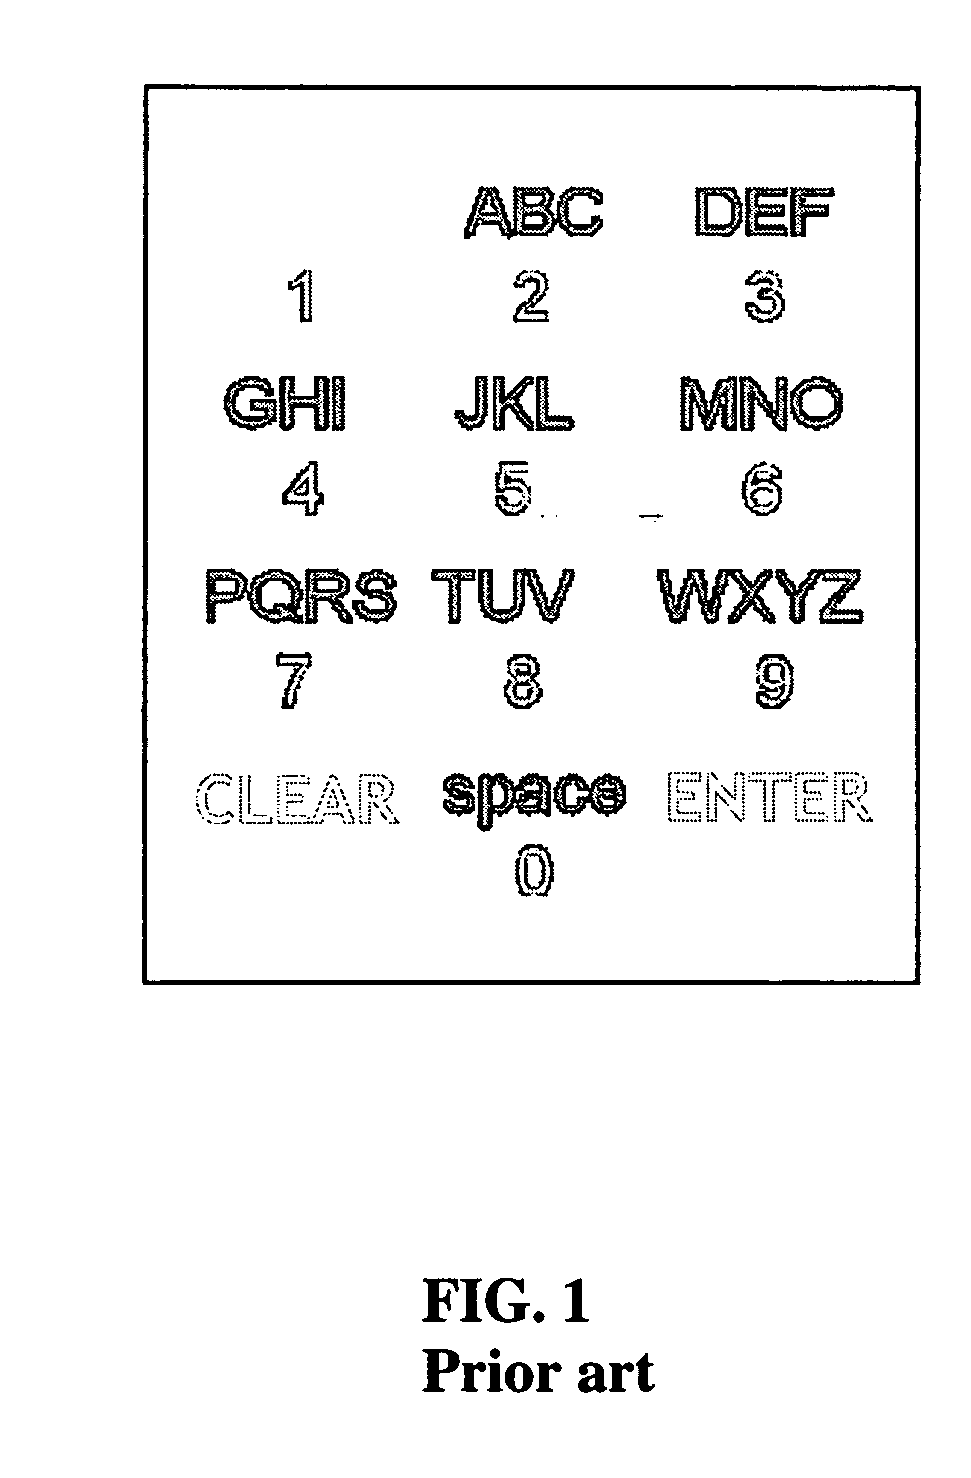 Method and system for secure sharing, gifting, and purchasing of content on television and mobile devices